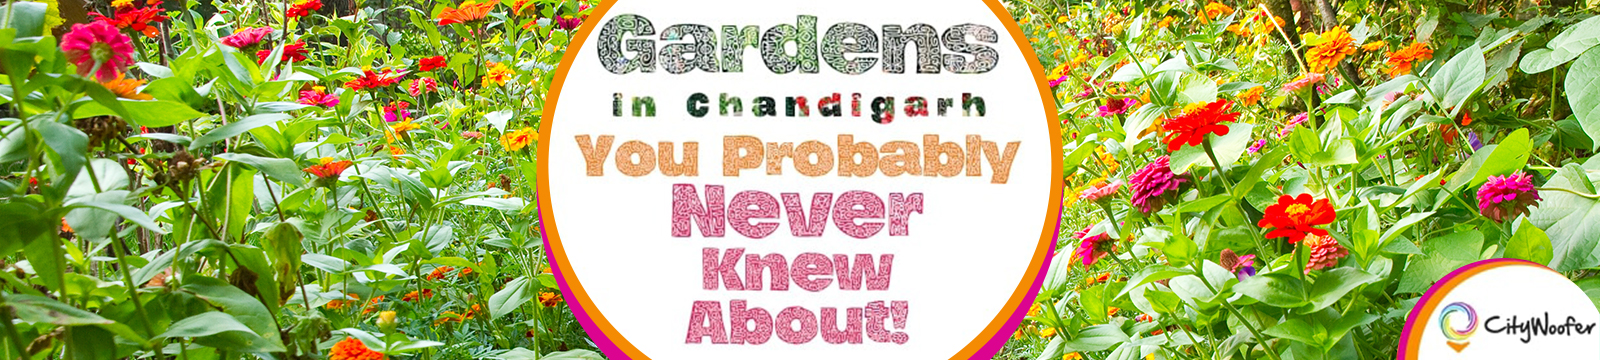 Gardens in Chandigarh You Probably Never Knew About!